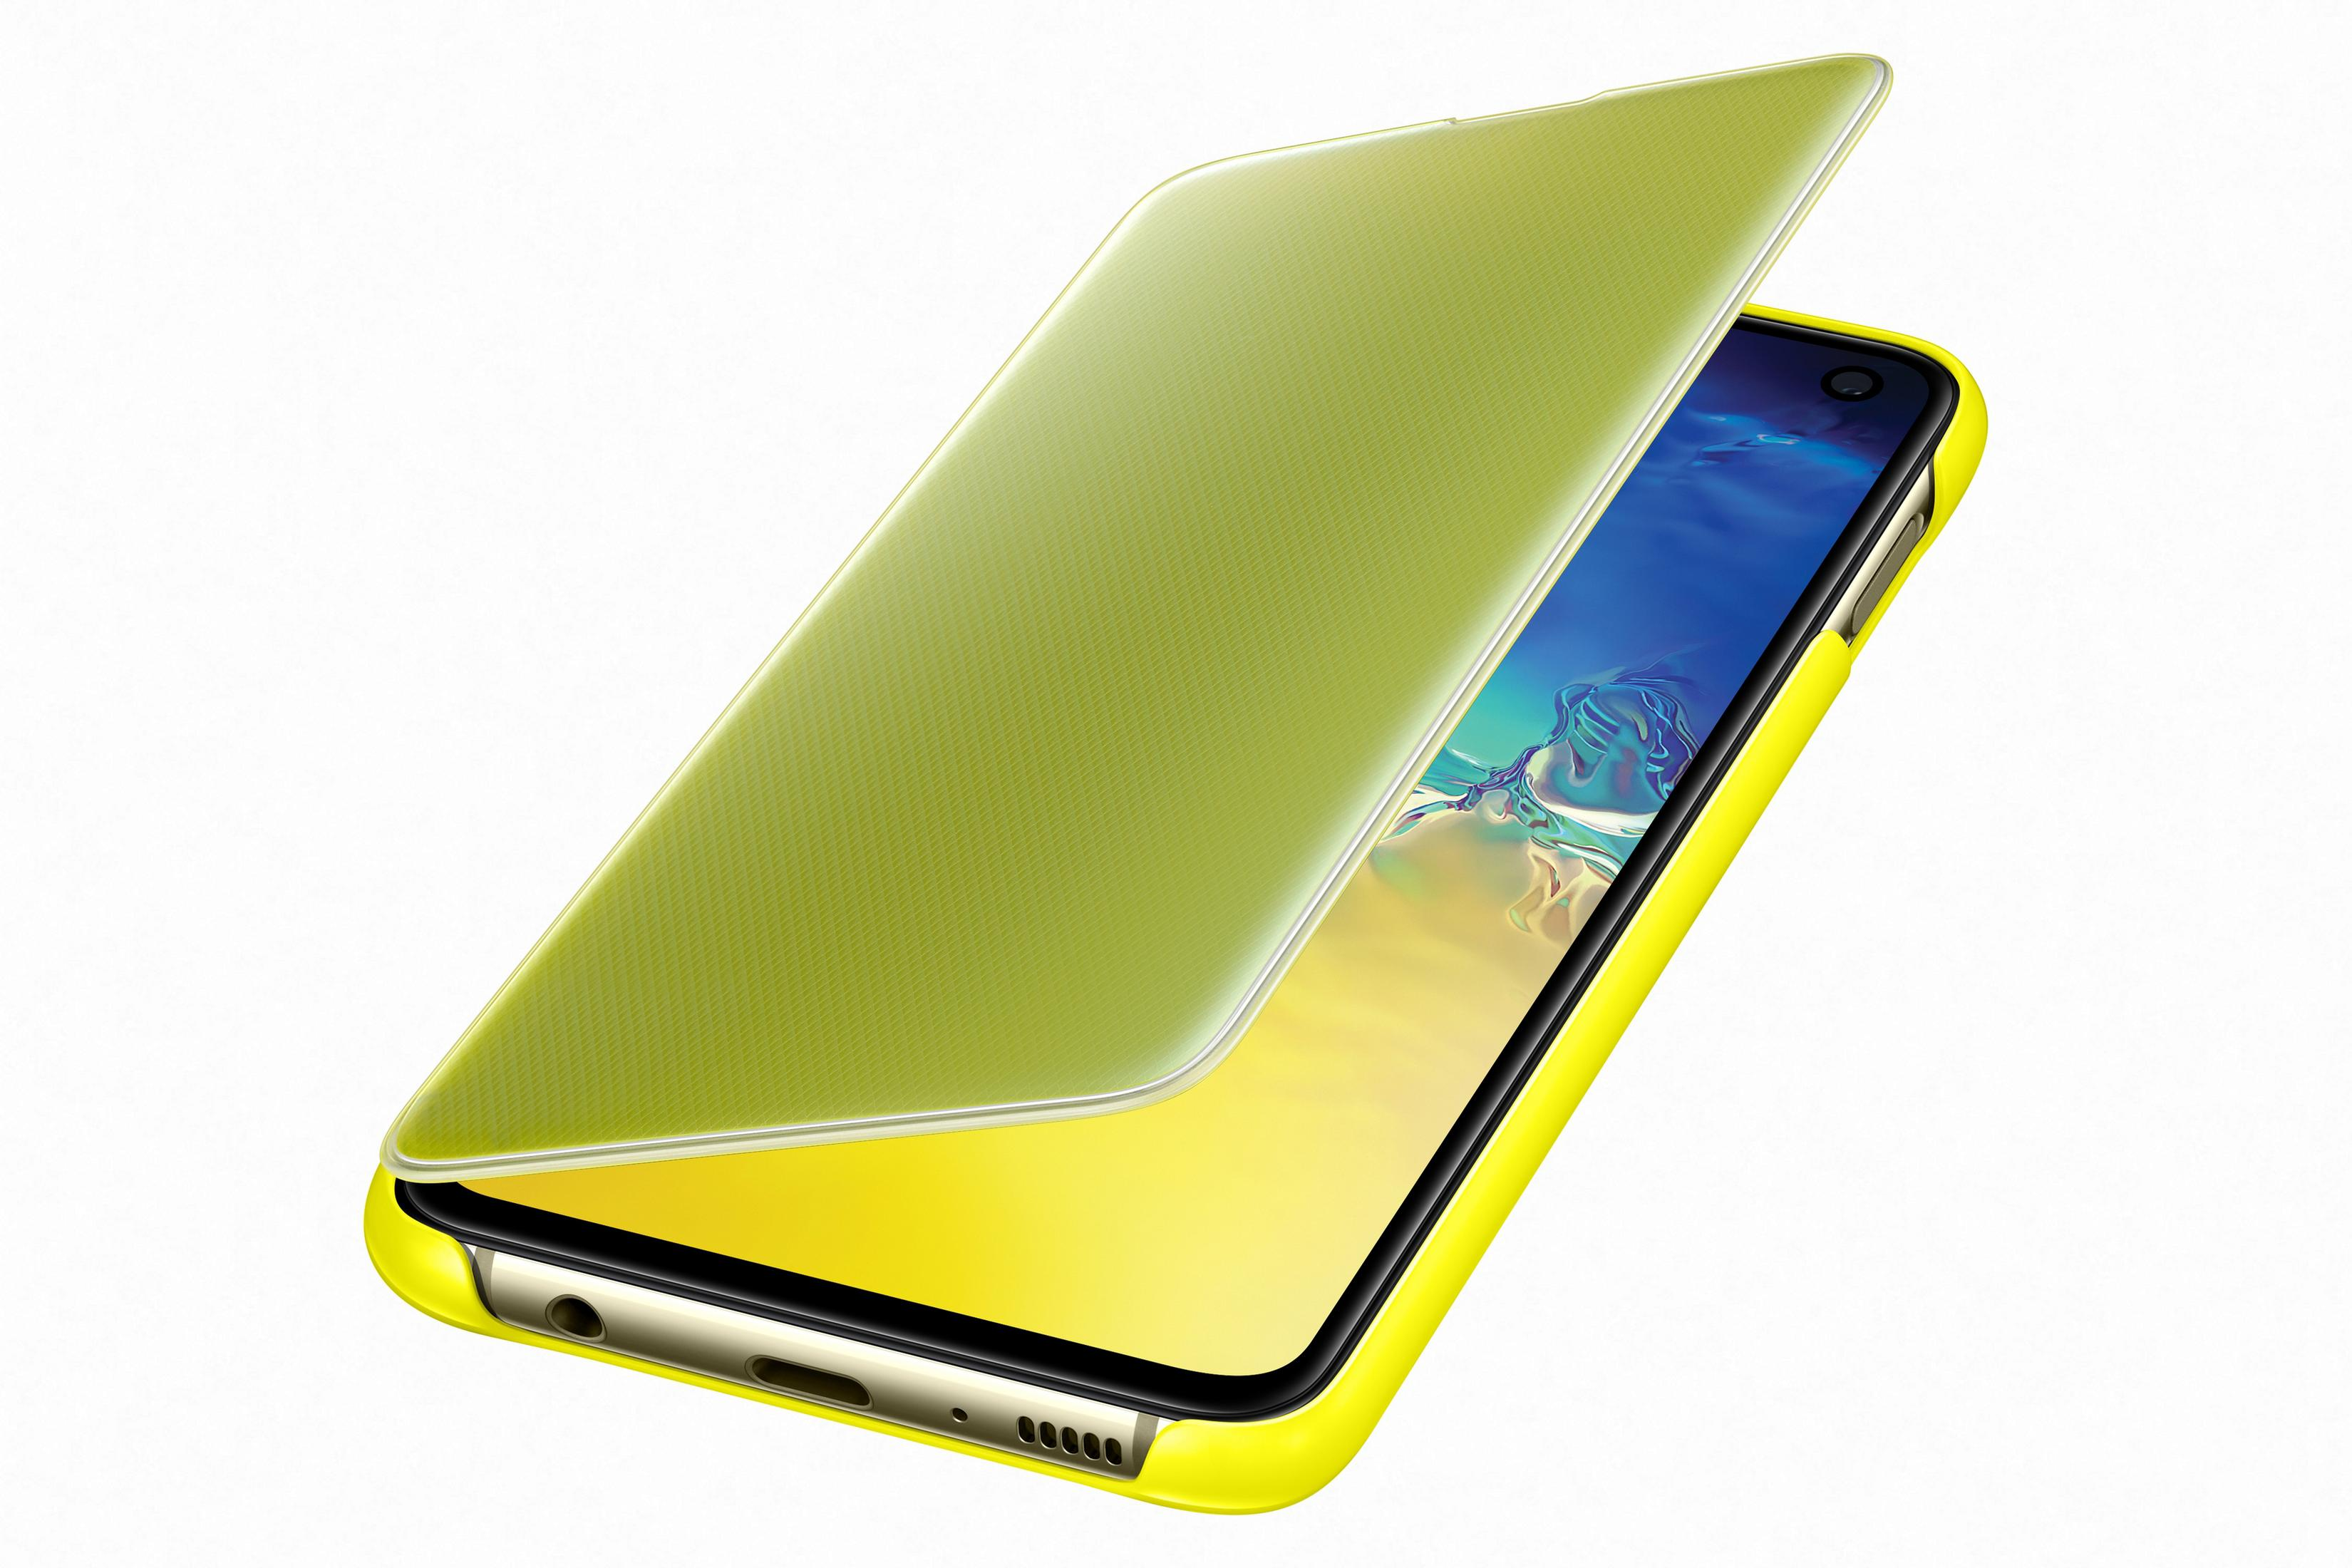 SAMSUNG EF-ZG970CYEGWW S10E CLEAR VIEW YELLOW, COVER Gelb Samsung, S10e, Bookcover, Galaxy